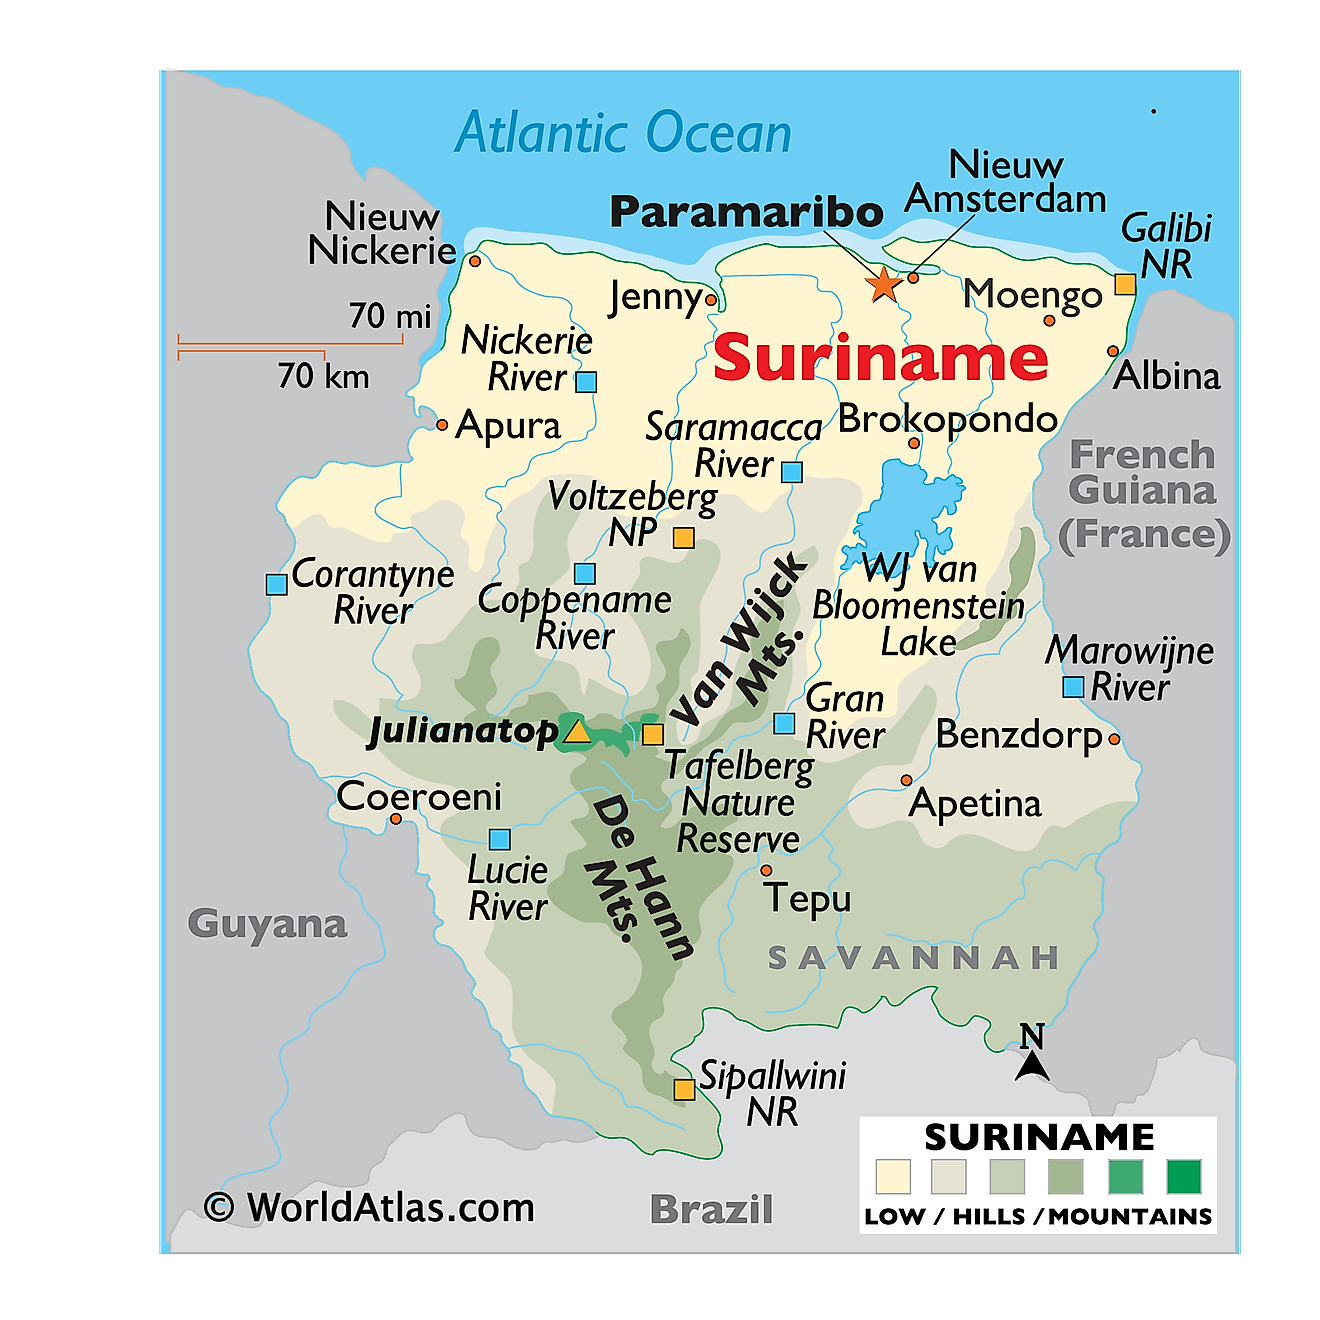 Physical Map of Suriname showing relief, mountain ranges, the WJ van Bloomenstein Lake, important rivers, protected areas, and more.